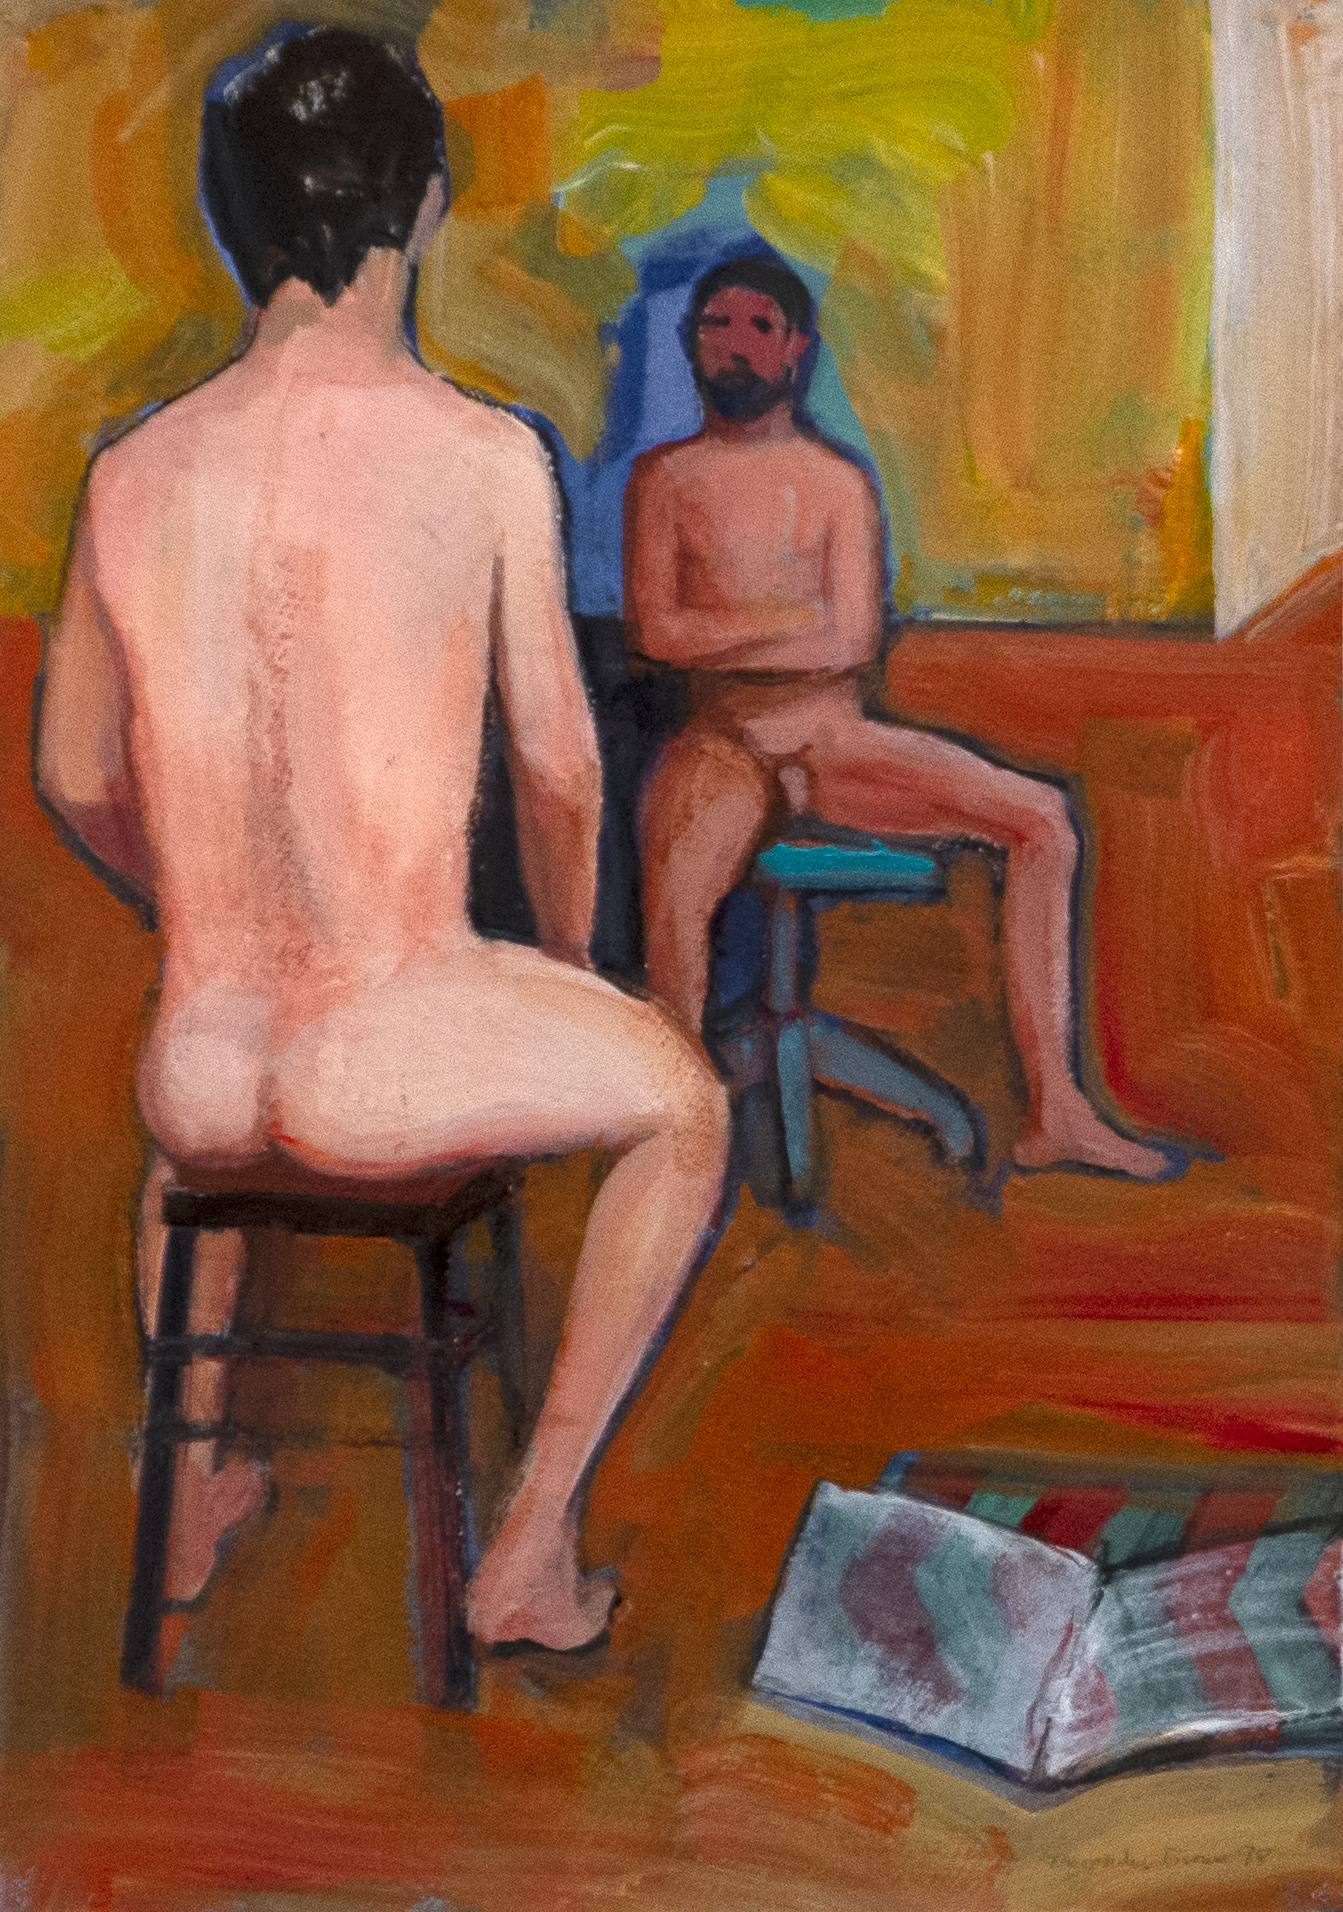 WILLIAM THEOPHILUS BROWN - Untitled (2 Male Nudes) - acrylic on paper - 14 x 9 3/4 in.